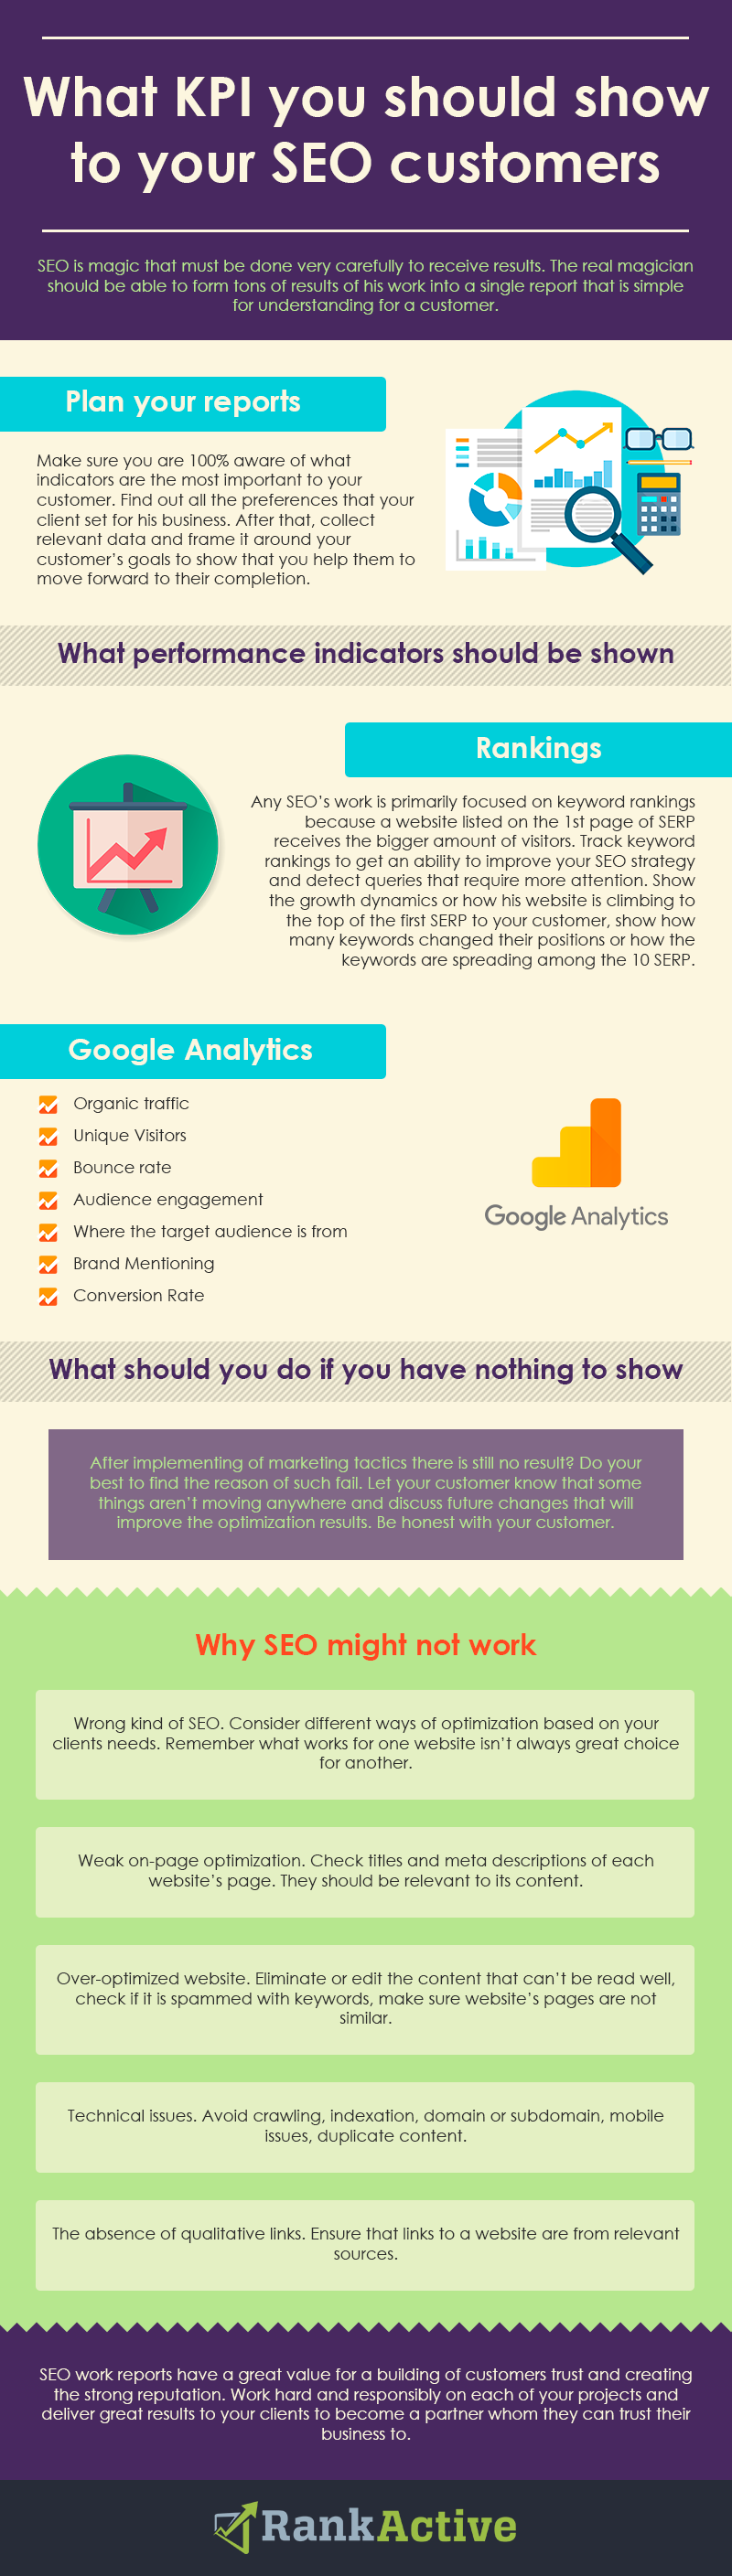 What KPI you should show to your SEO customers